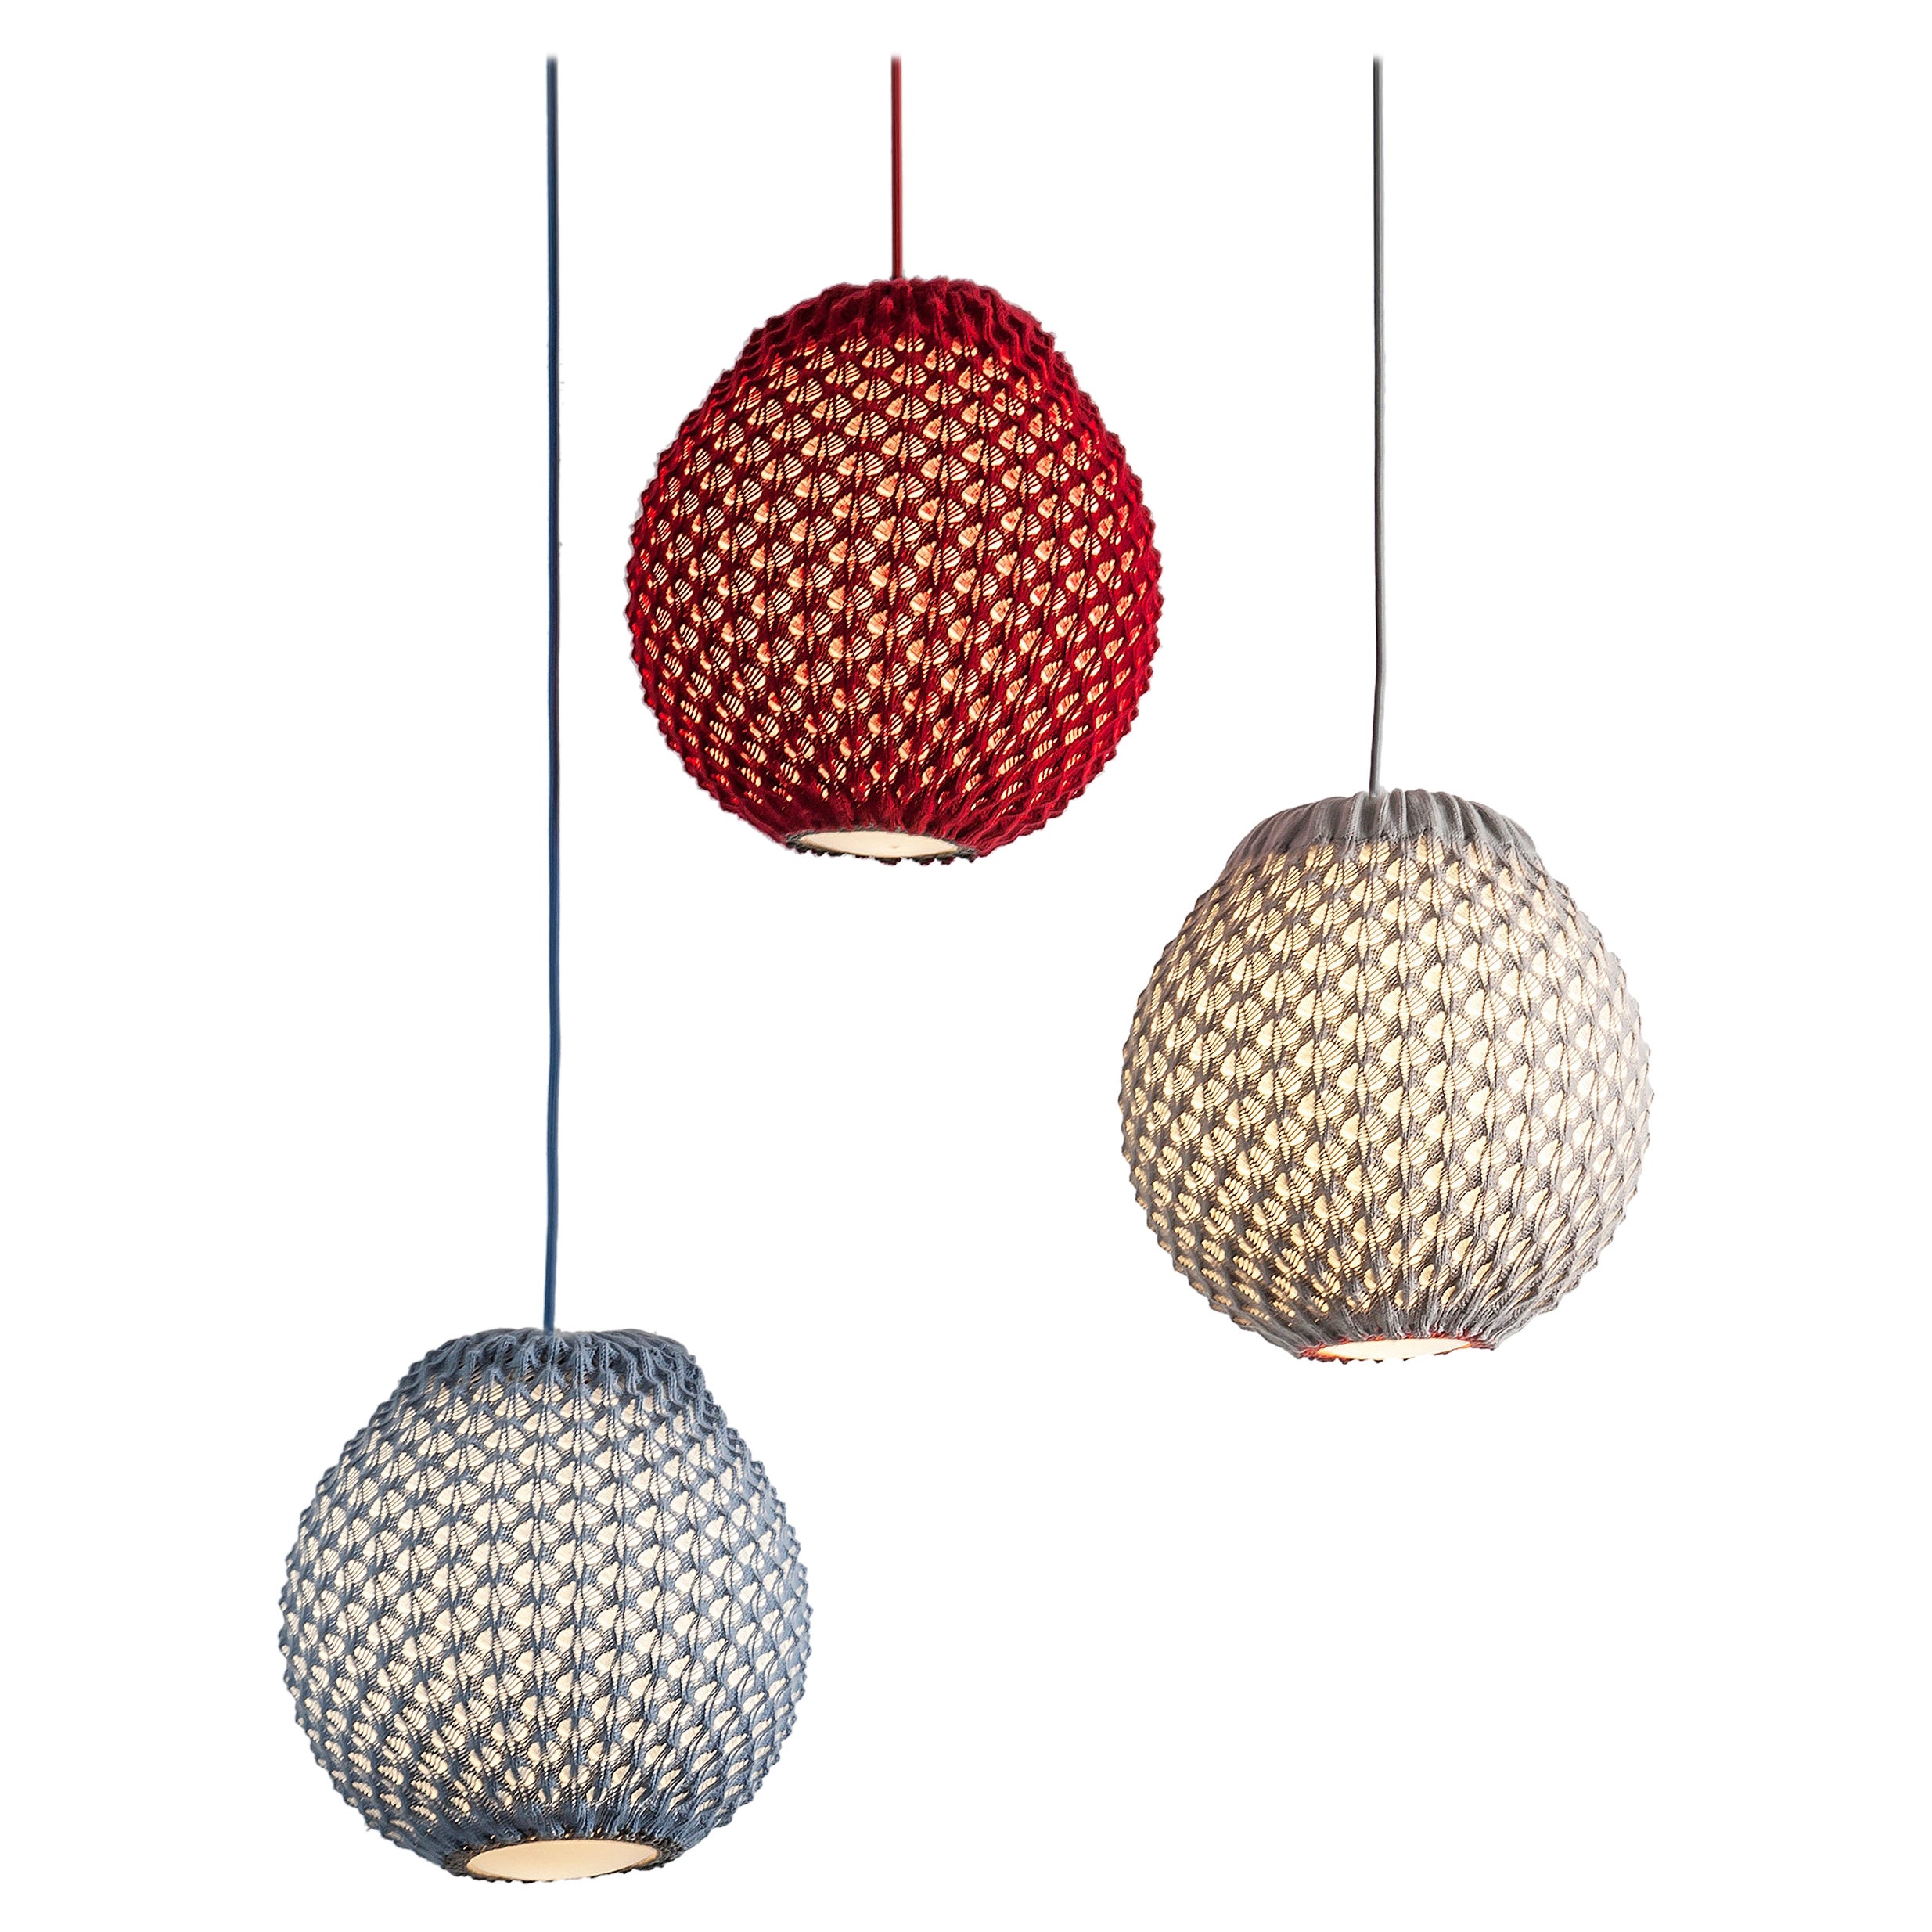 Knitted Lighting Fixture  - Pendant  - Large size 50cm diameter For Sale